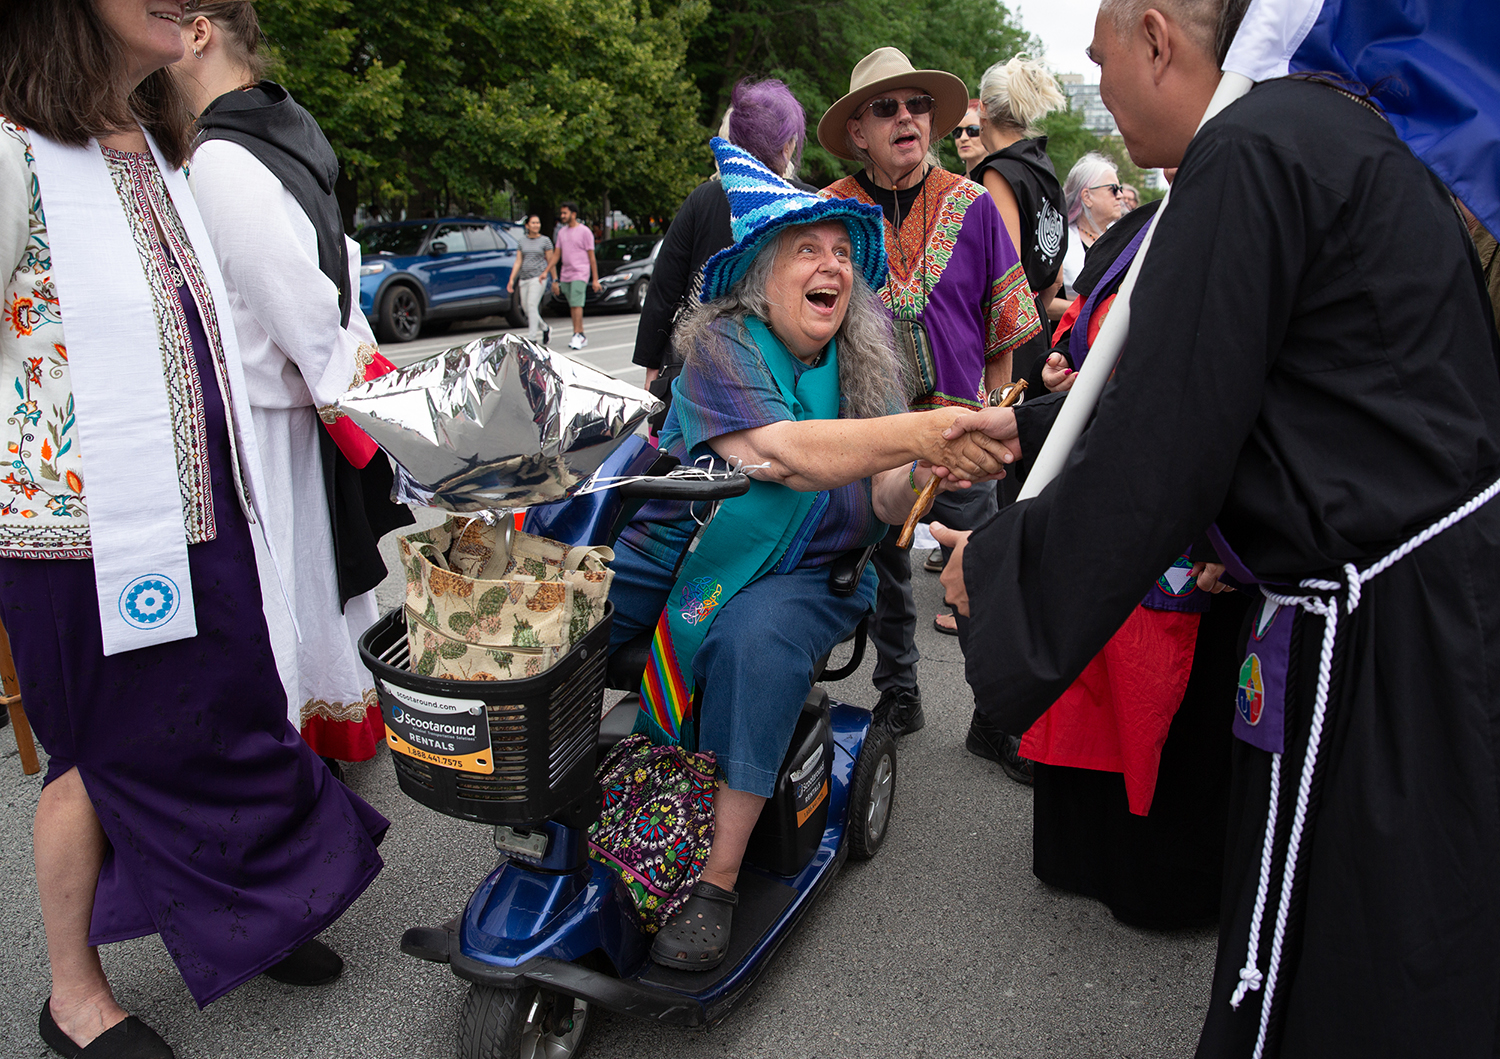 The Rev. Selena Fox of Circle Sanctuary greets another participant in the Parade of Faiths in downtown Chicago on Aug. 13, 2023. The parade preceded the Parliament of the World’s Religions, which began Aug. 14. Photo by Lauren Pond for RNS